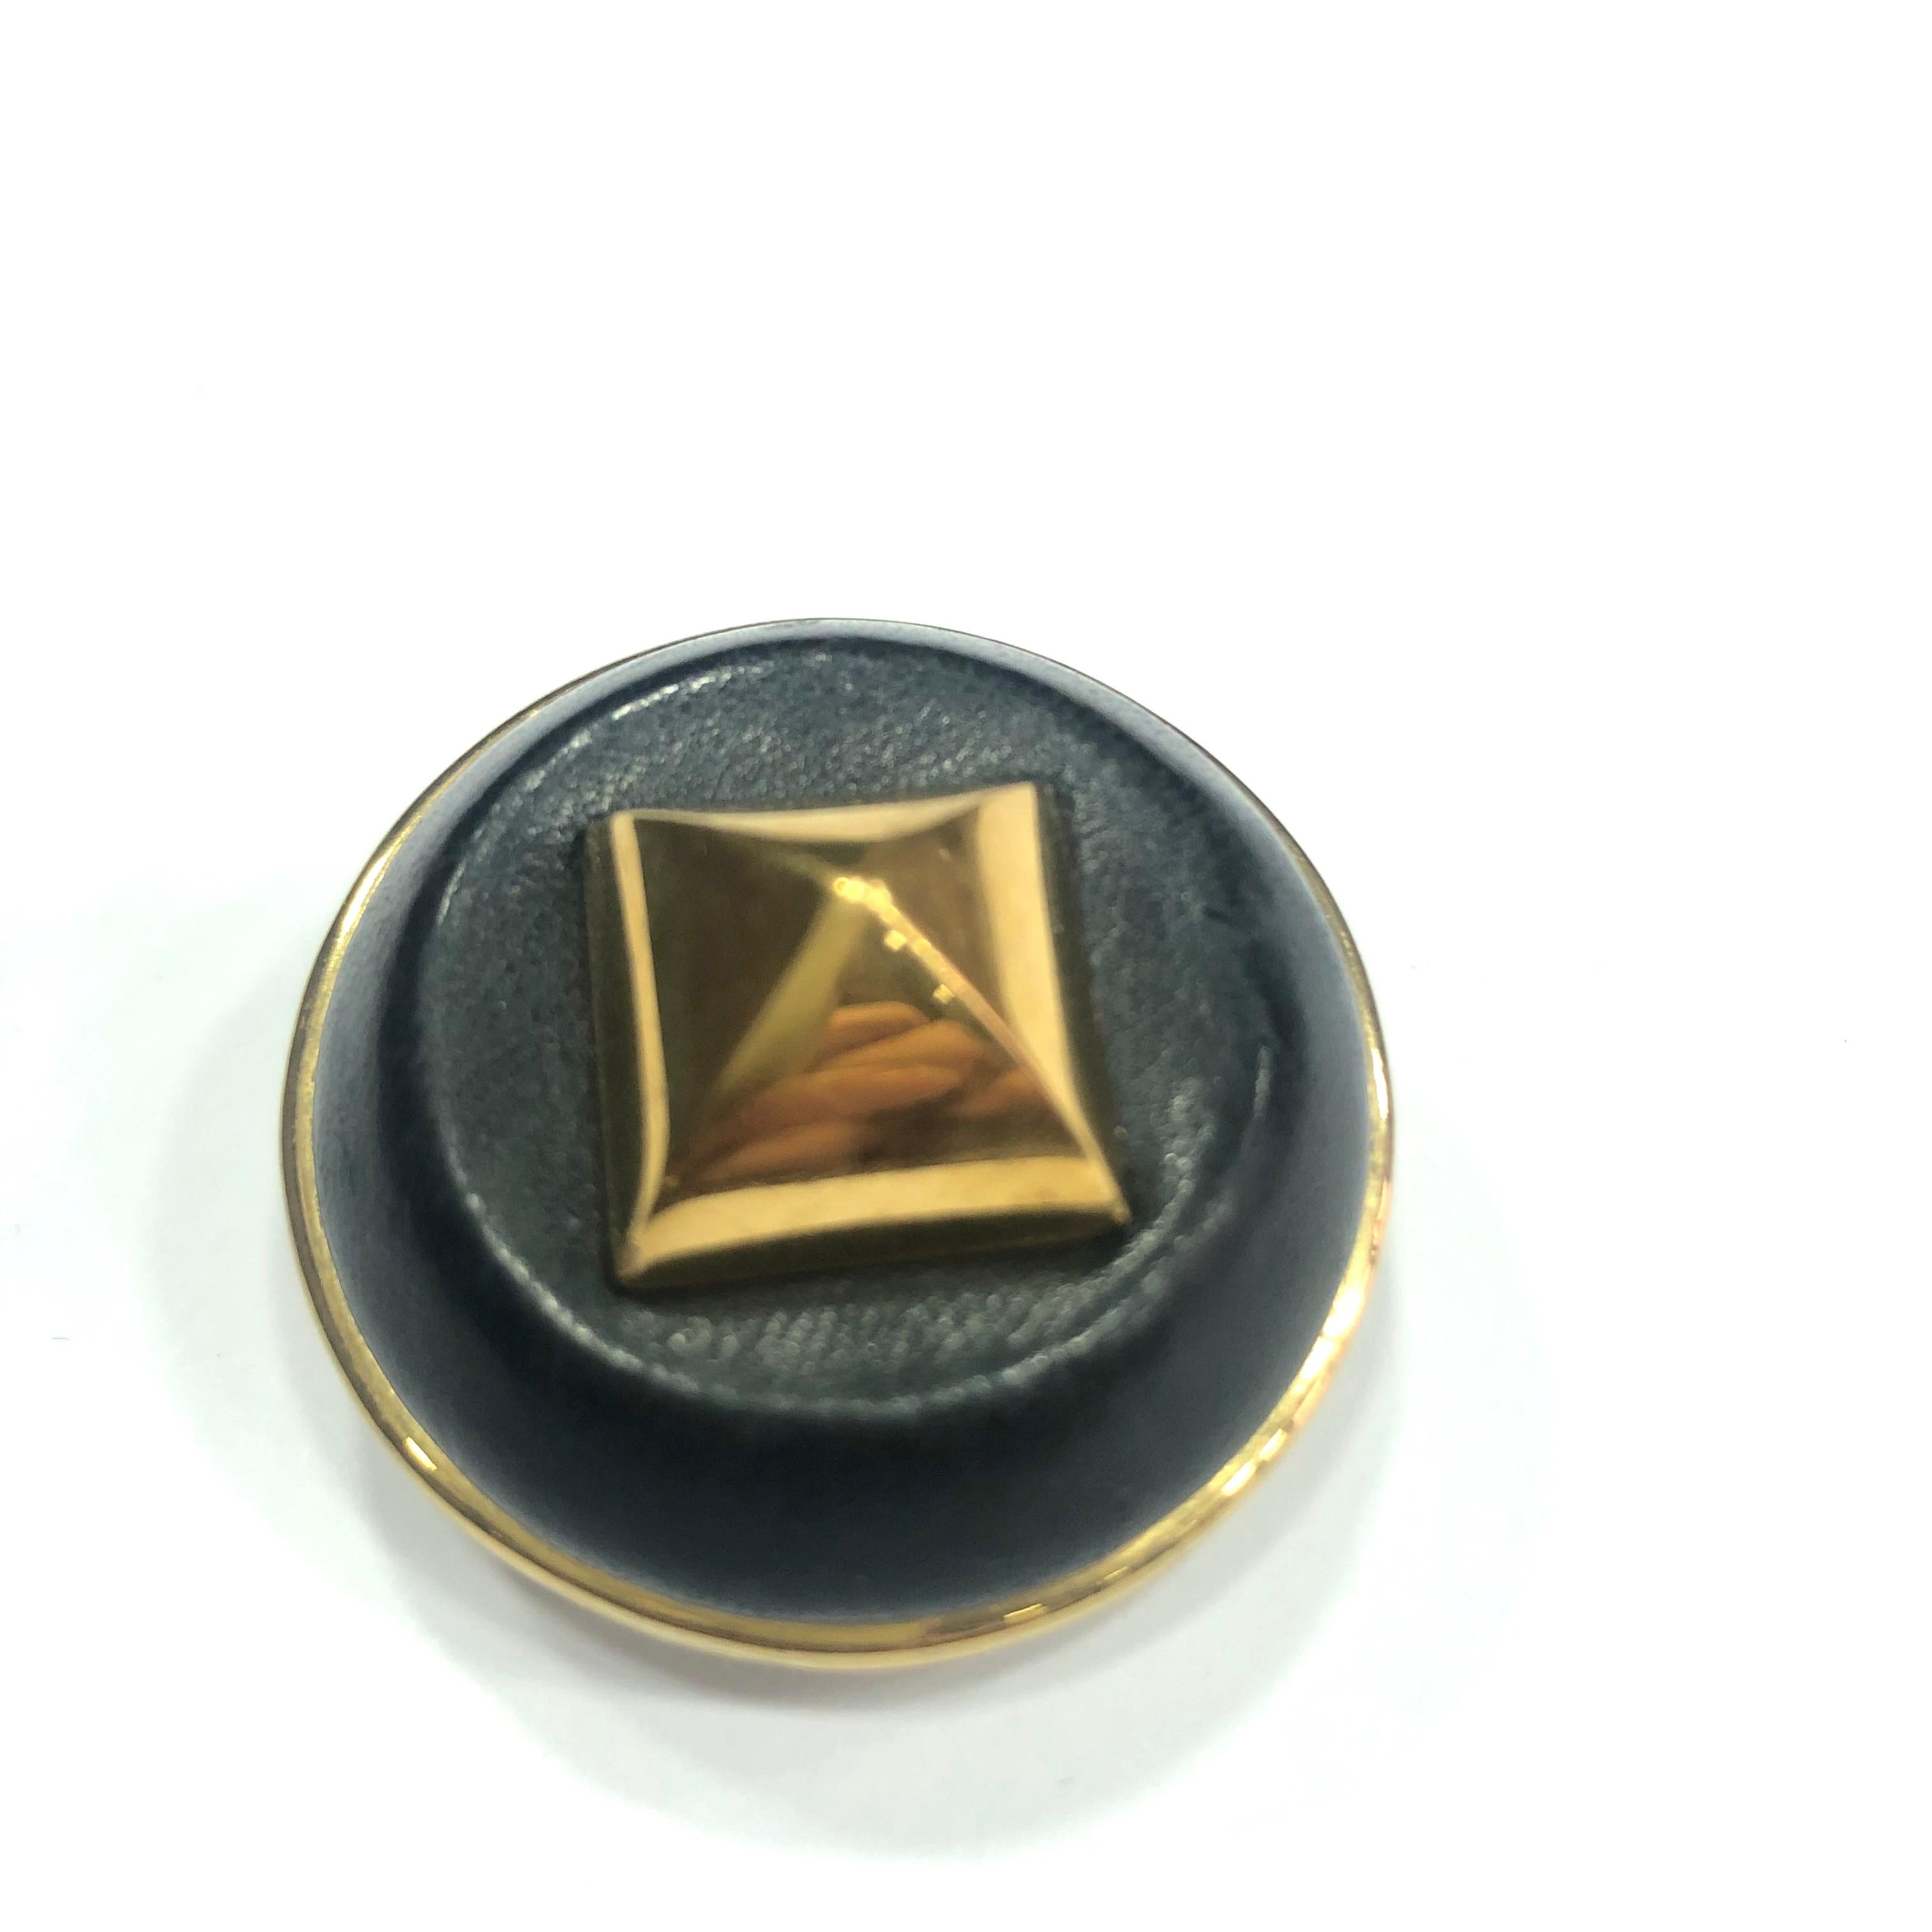 Collector! Hermès vintage 'Médor' clip-on earrings in gold plated metal and black leather

Diameter: 3.5 cm. In very good vintage condition

Will be delivered in a Hermès pouch